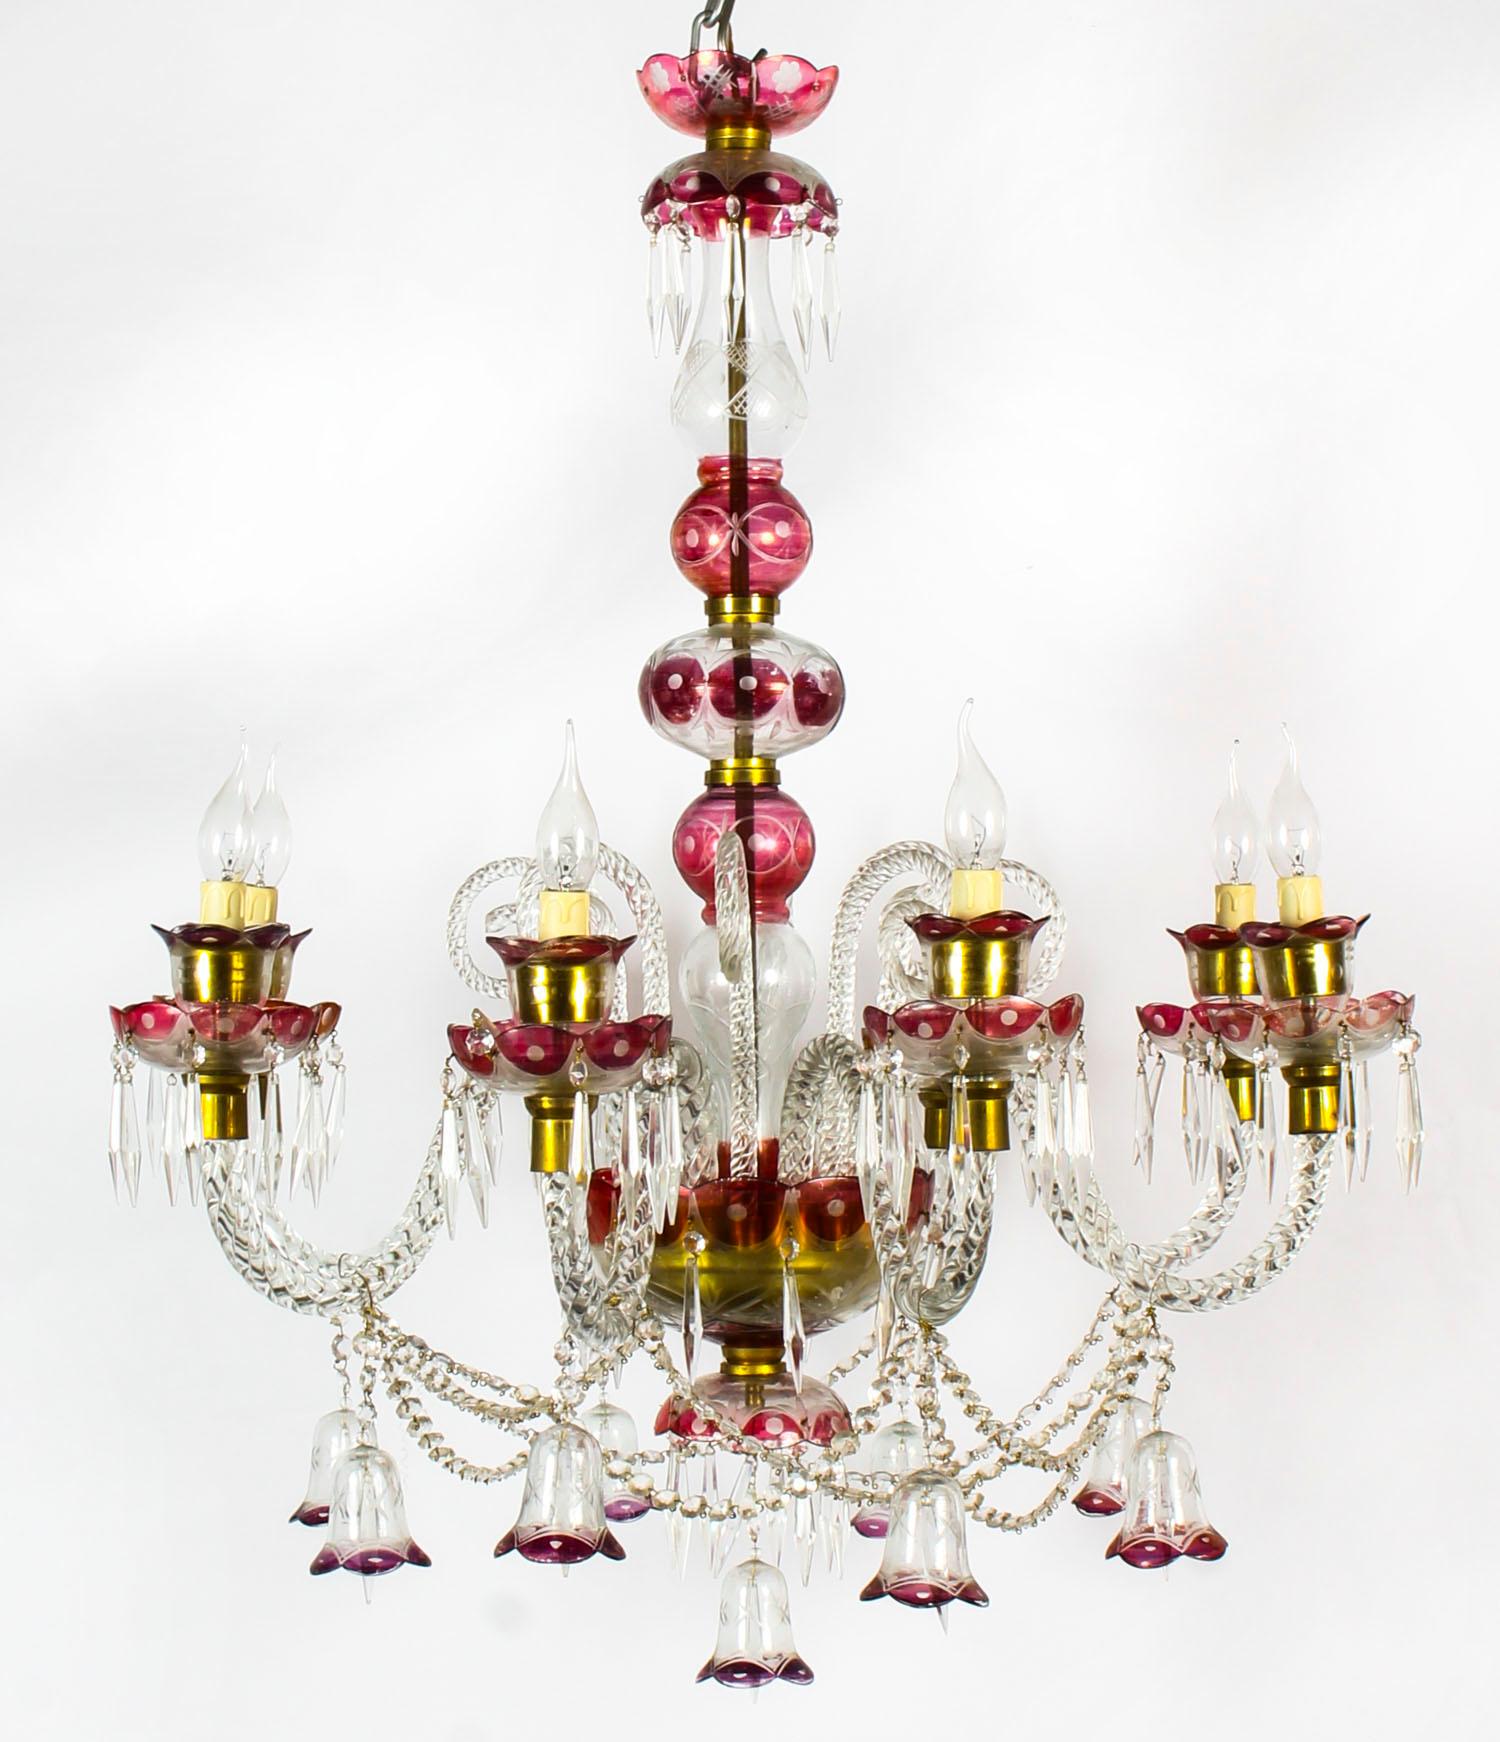 Italian Pair of Venetian 8-Light Crystal Cranberry Chandeliers, Early 20th Century